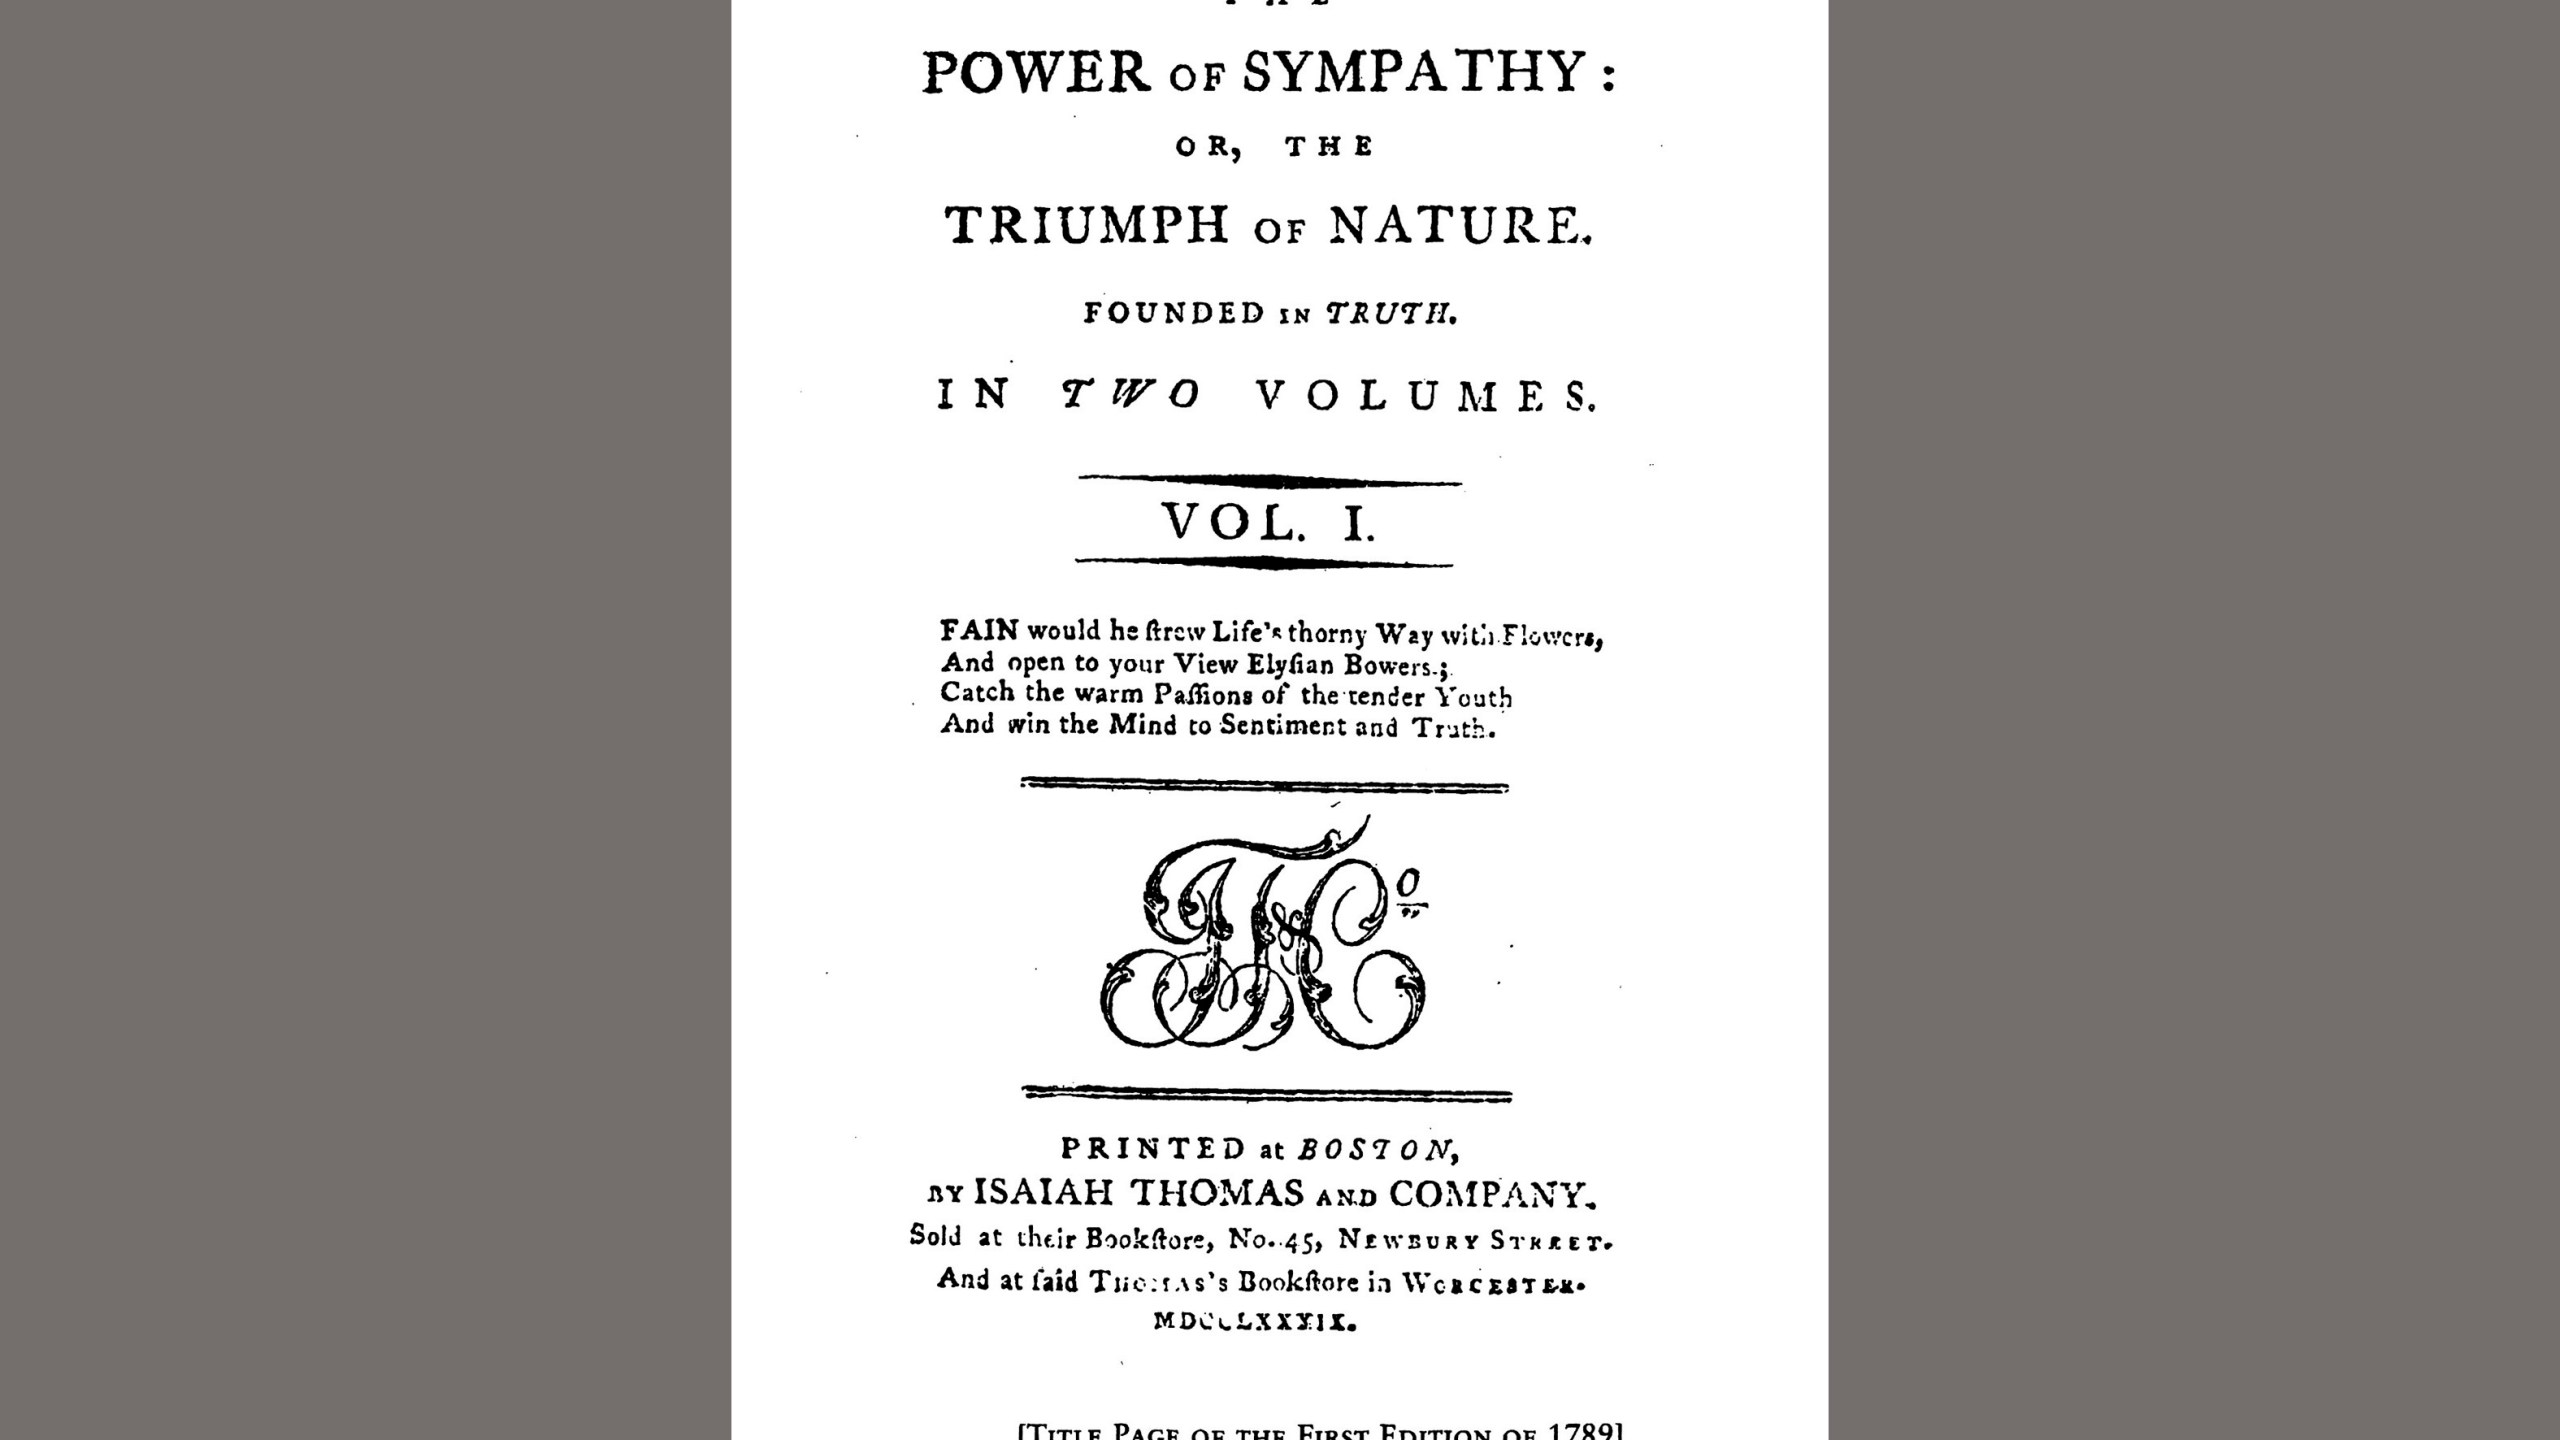 This image released by Penguin Classics shows the title page of the first edition of the 1789 book "The Power of Sympathy" by William Hill Brown. (Penguin Classics via AP)